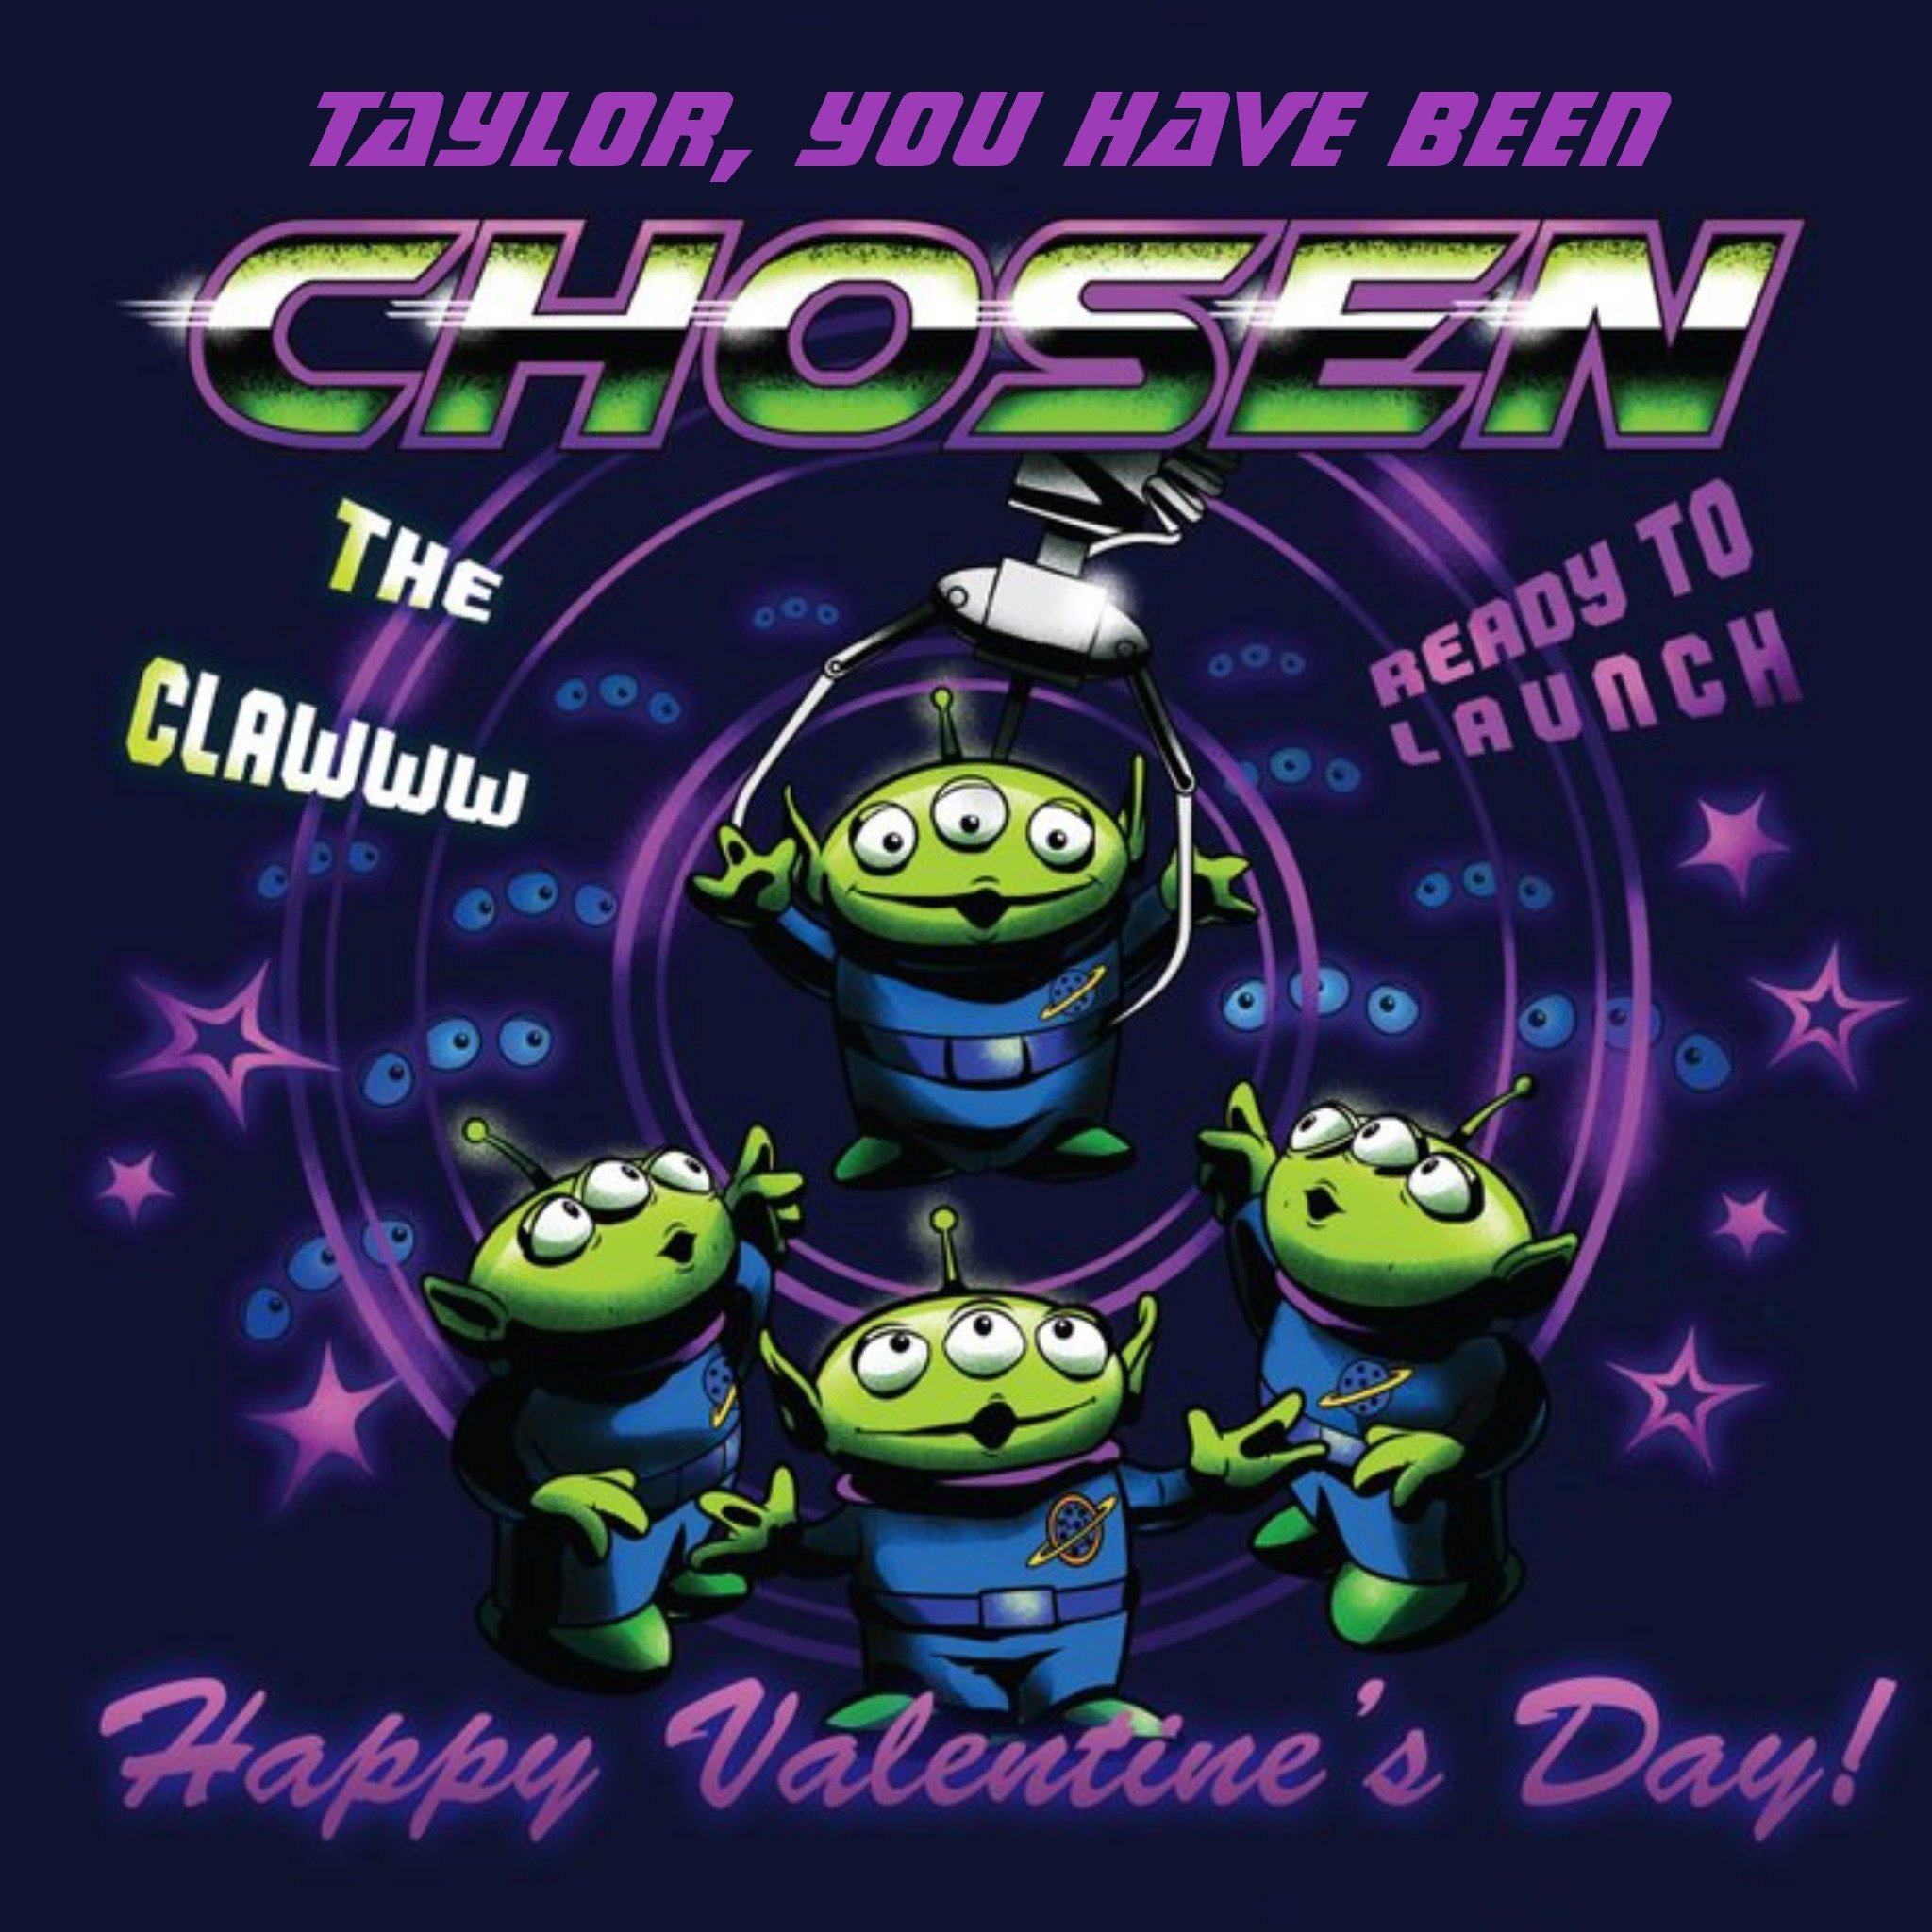 Disney Toy Story Personalised You've Been Chosen Valentine's Day Card, Square